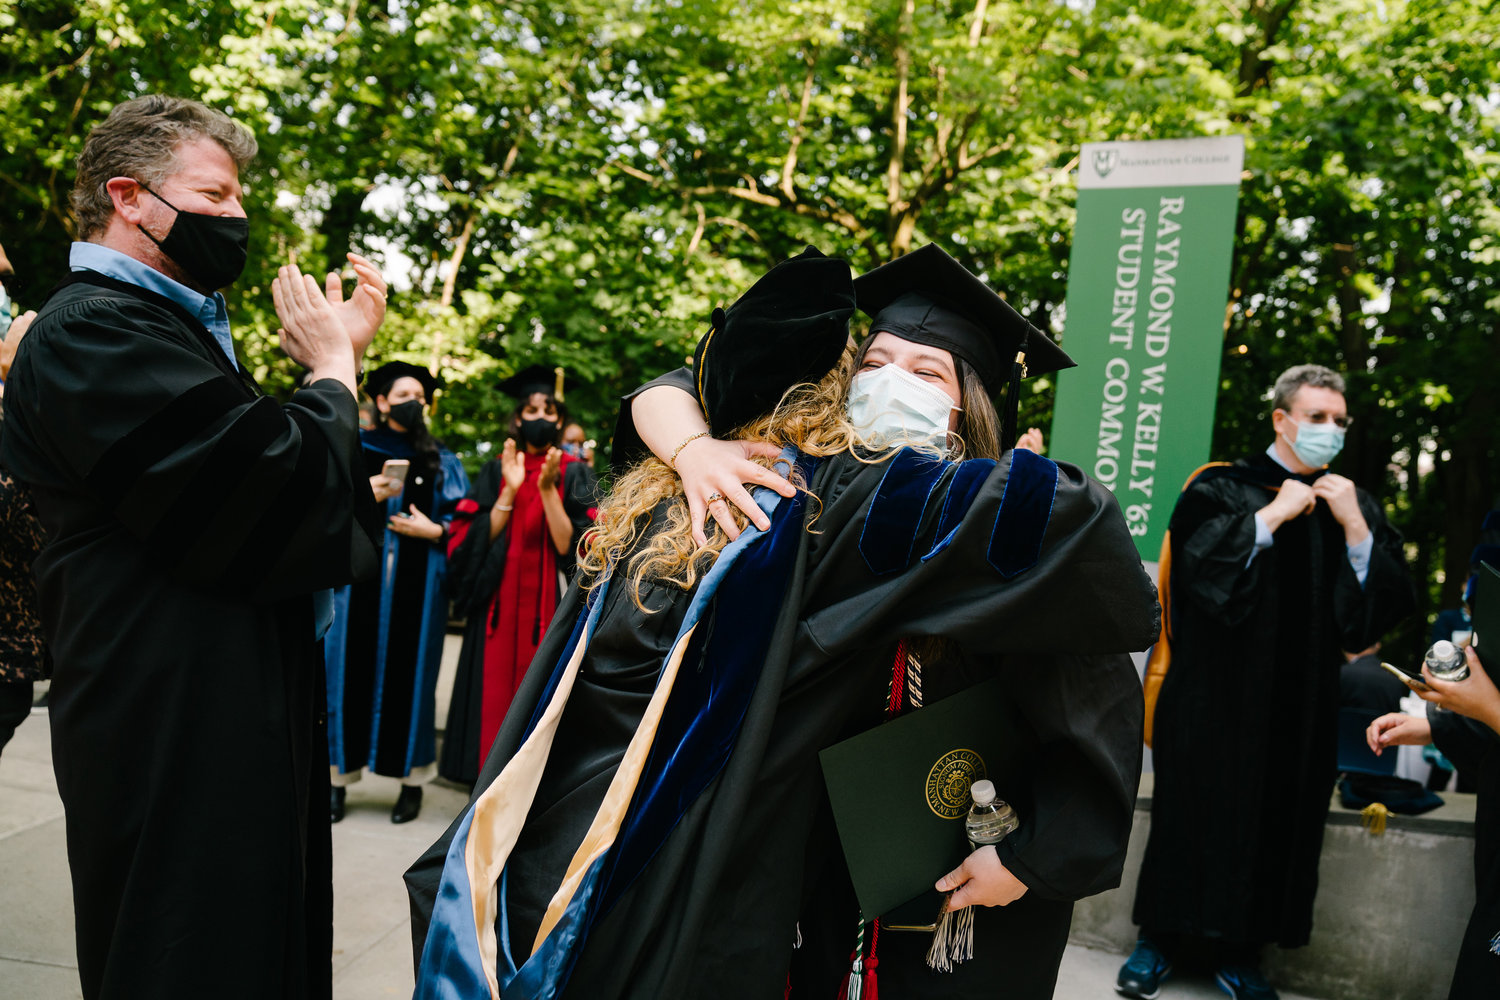 Manhattan College hosted several in-person ceremonies for its Class of 2021 graduates. To comply with social distancing guidelines, eight separate ceremonies took place over the course of three days.